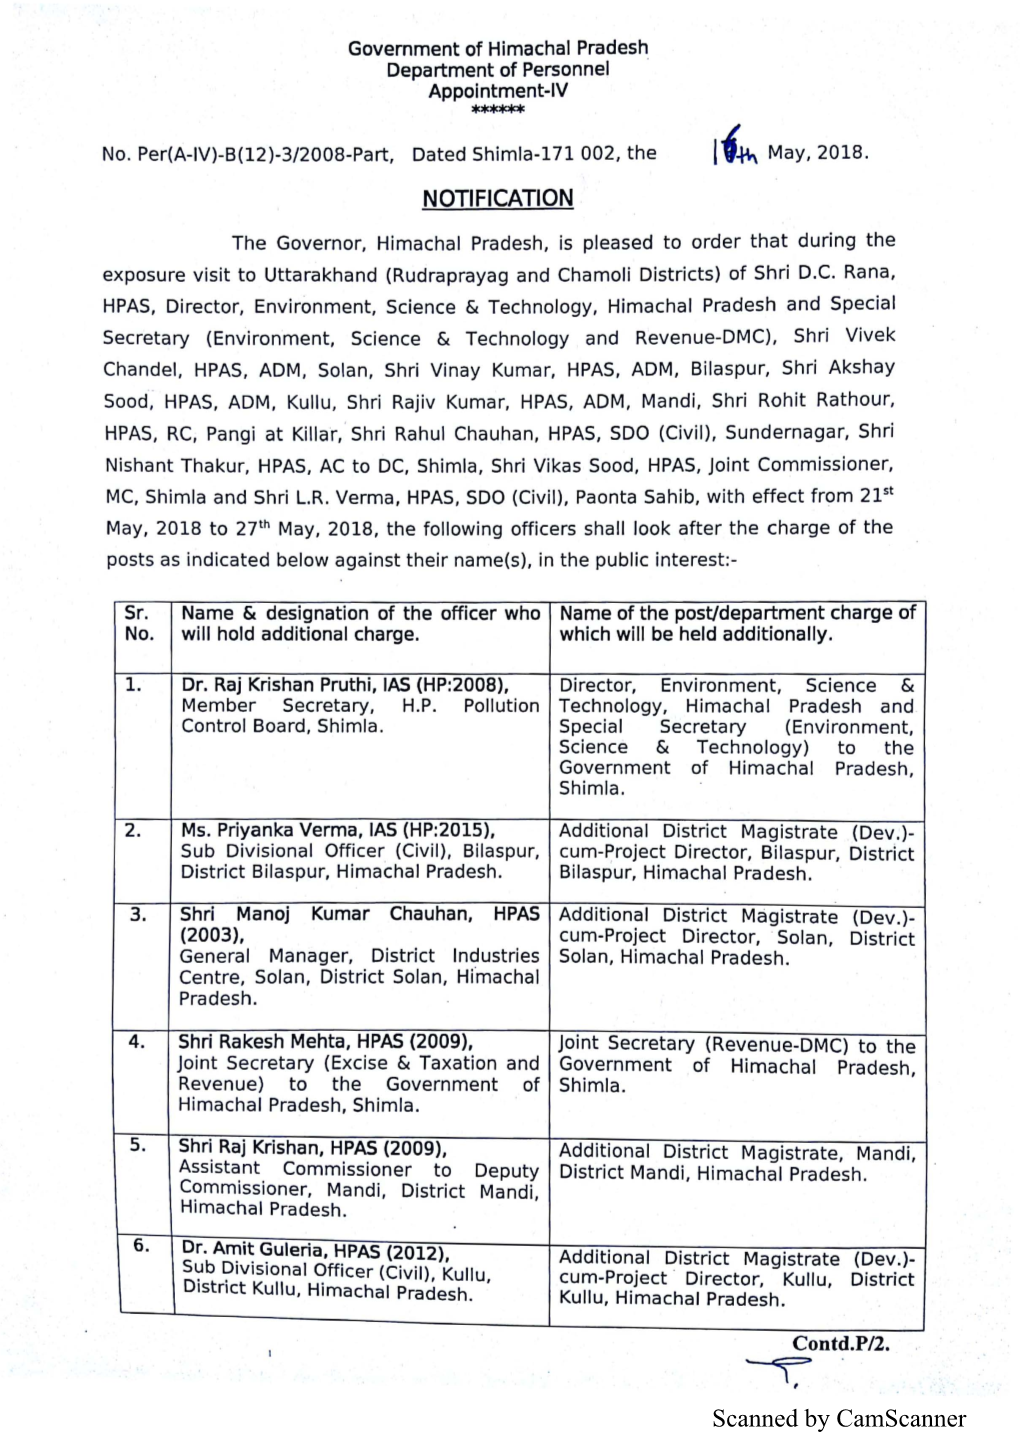 Additional Charge to IAS/HPAS Officers